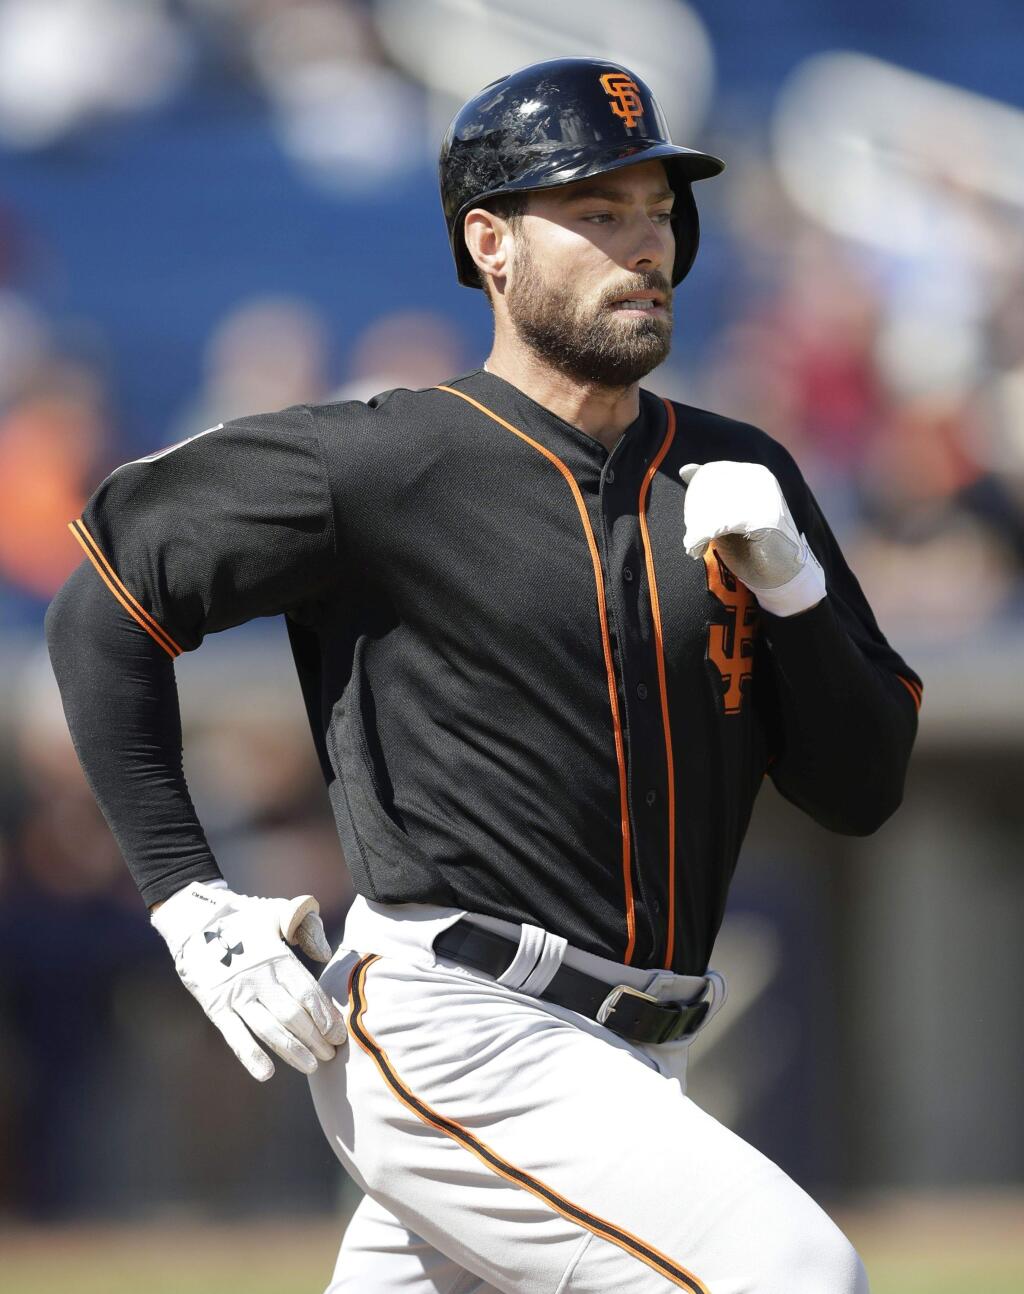 The San Francisco Giants' Mac Williamson runs to first during the second inning of a spring training game against the Milwaukee Brewers, Wednesday, Feb. 28, 2018, in Maryvale, Ariz. (AP Photo/Carlos Osorio)